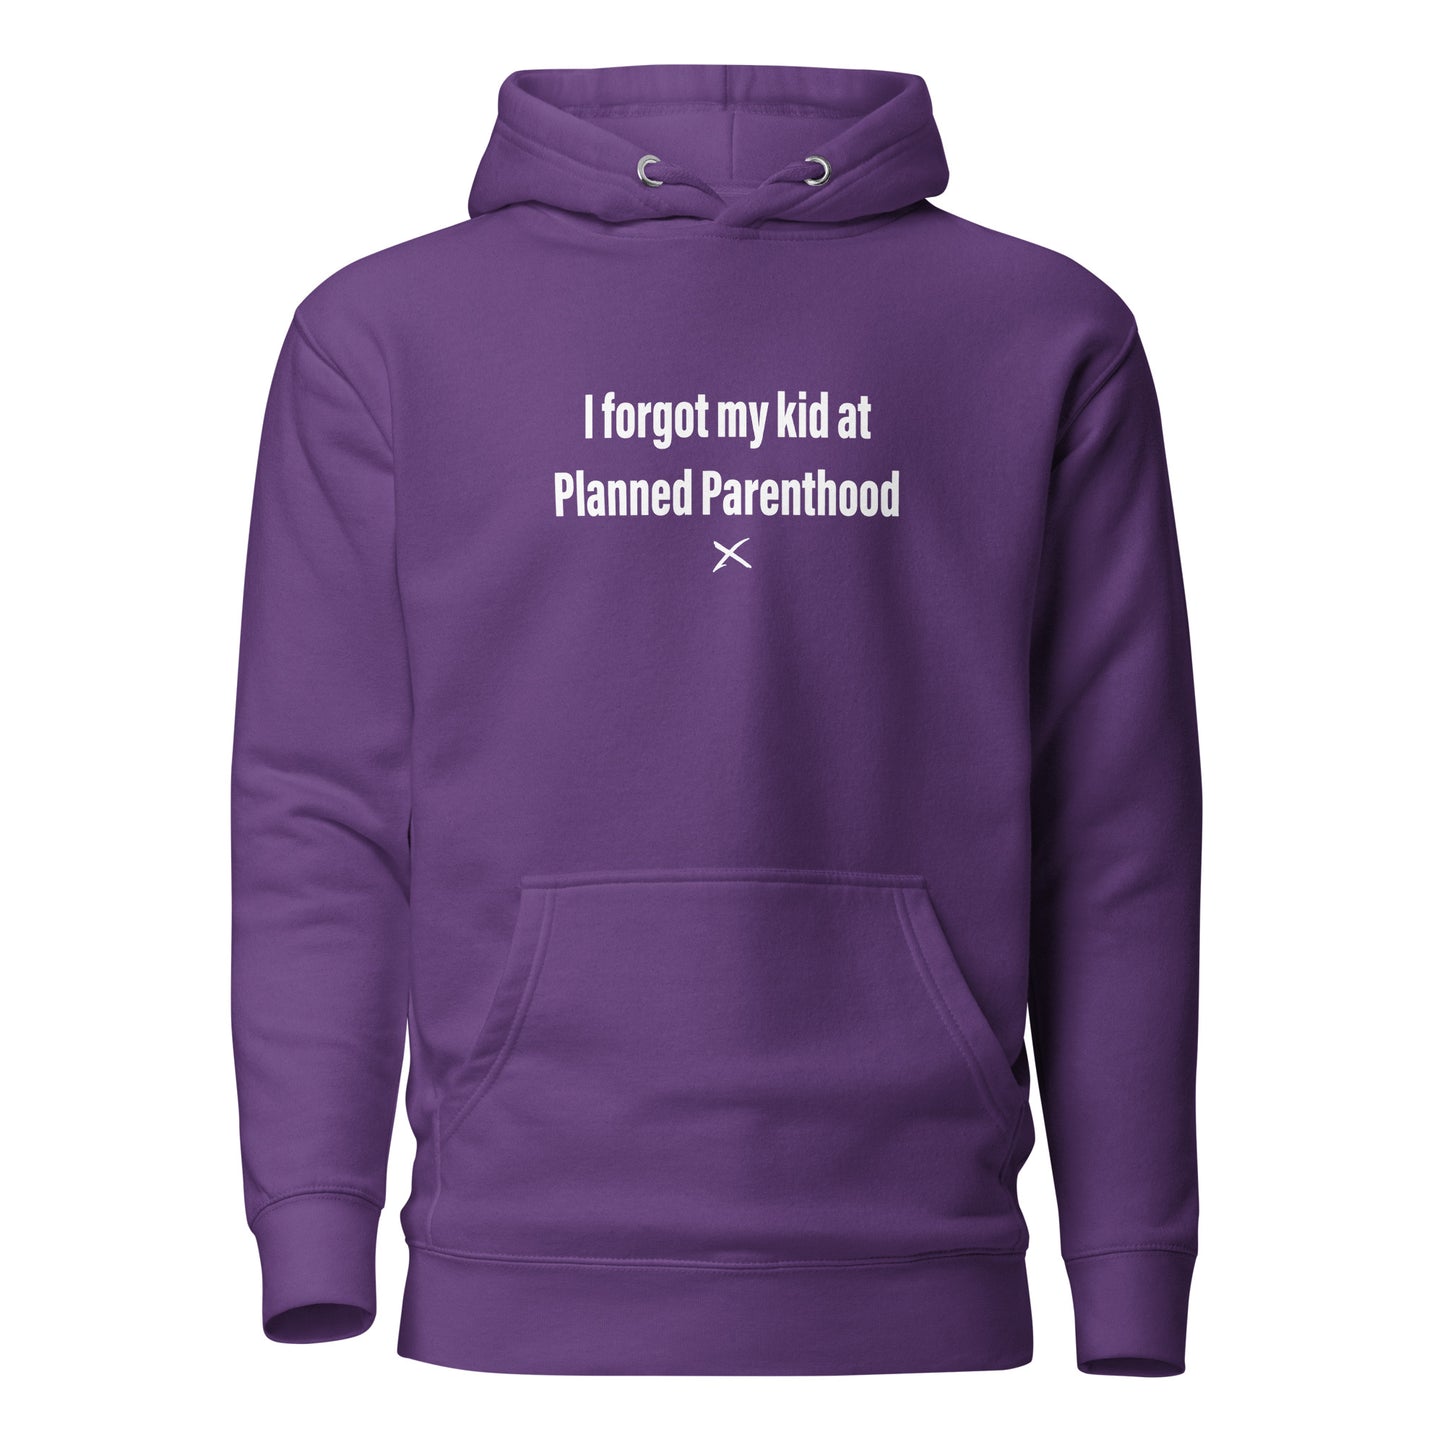 I forgot my kid at Planned Parenthood - Hoodie